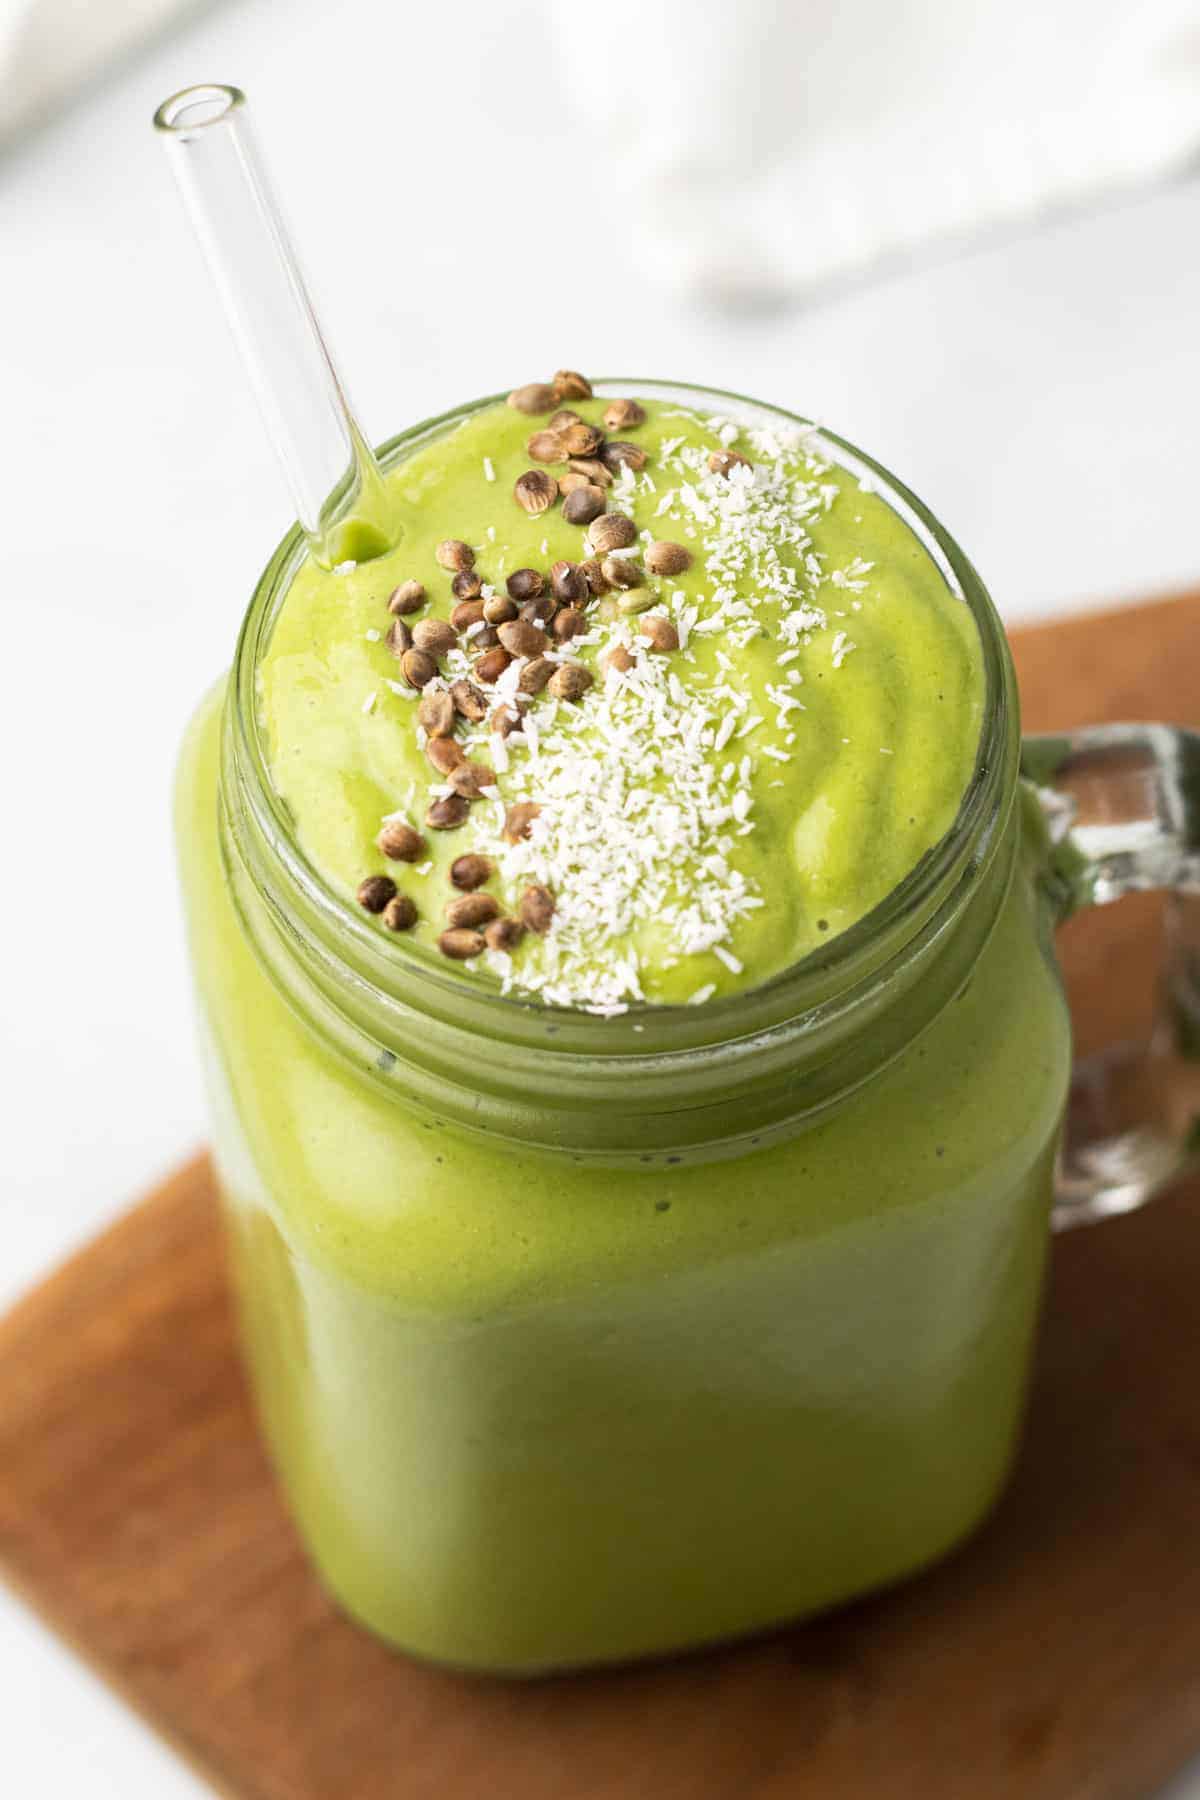 Low-Carb Green Smoothie in a glass jar with a glass straw and topped with shredded coconut and flax seeds